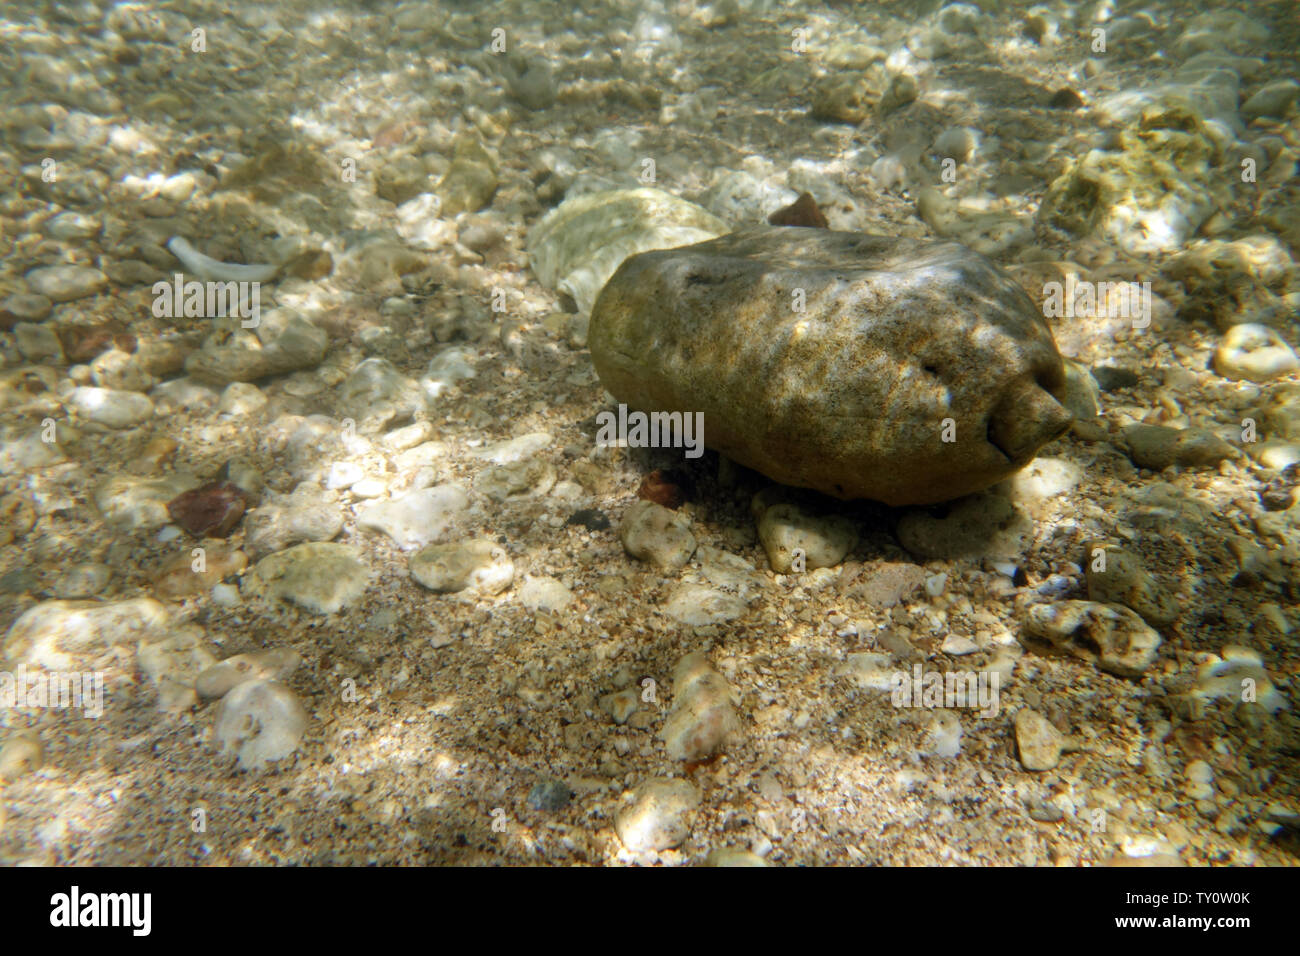 Discarded US Army canteen from WWII found underwater, Top Rock, Saama, Efate, Vanuatu Stock Photo